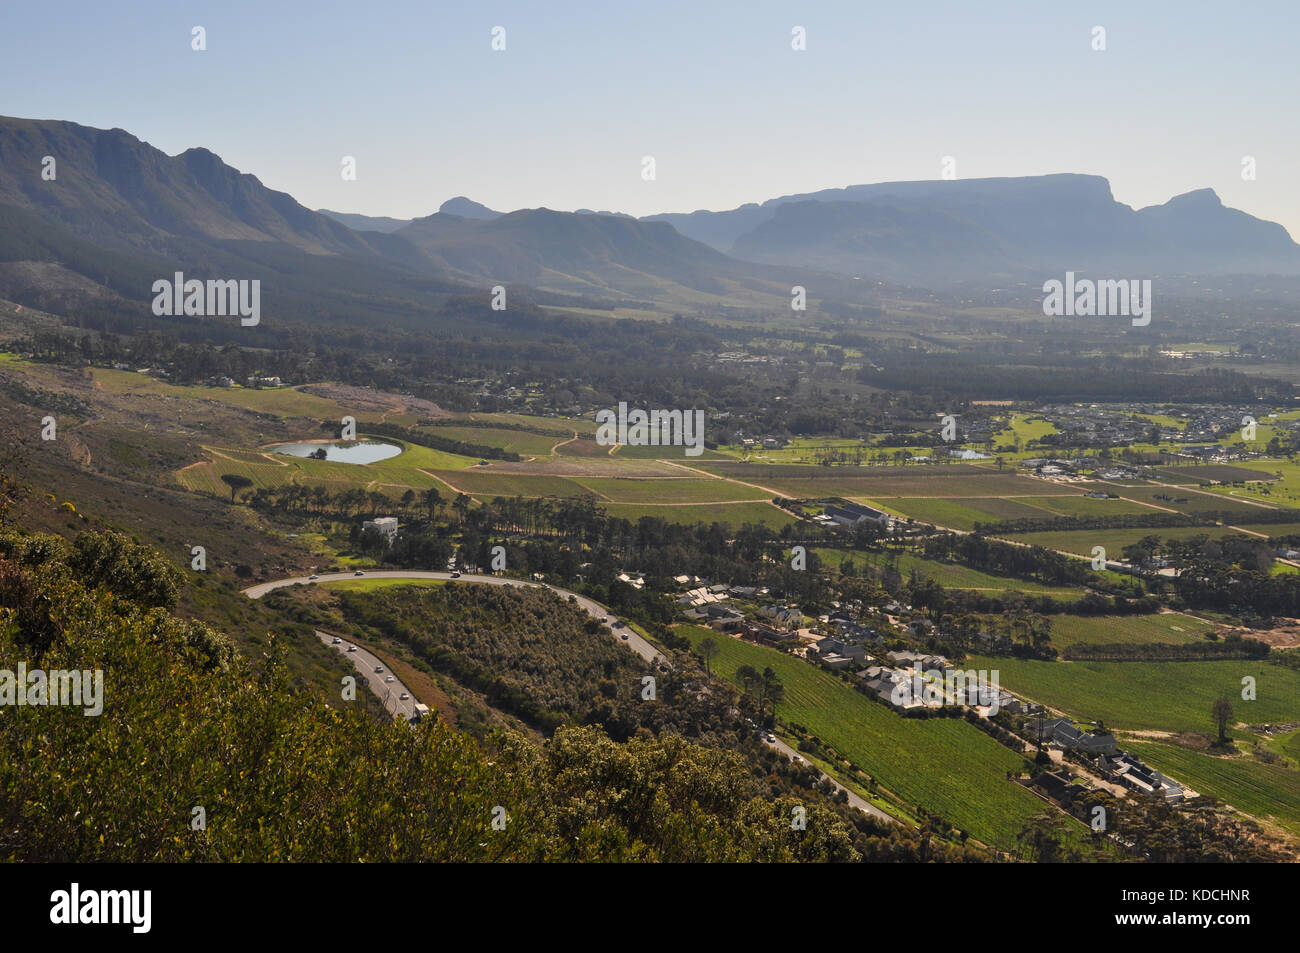 Semi aerial view near Silvermine, Table Mountain National Park, Cape Town, South Africa Stock Photo